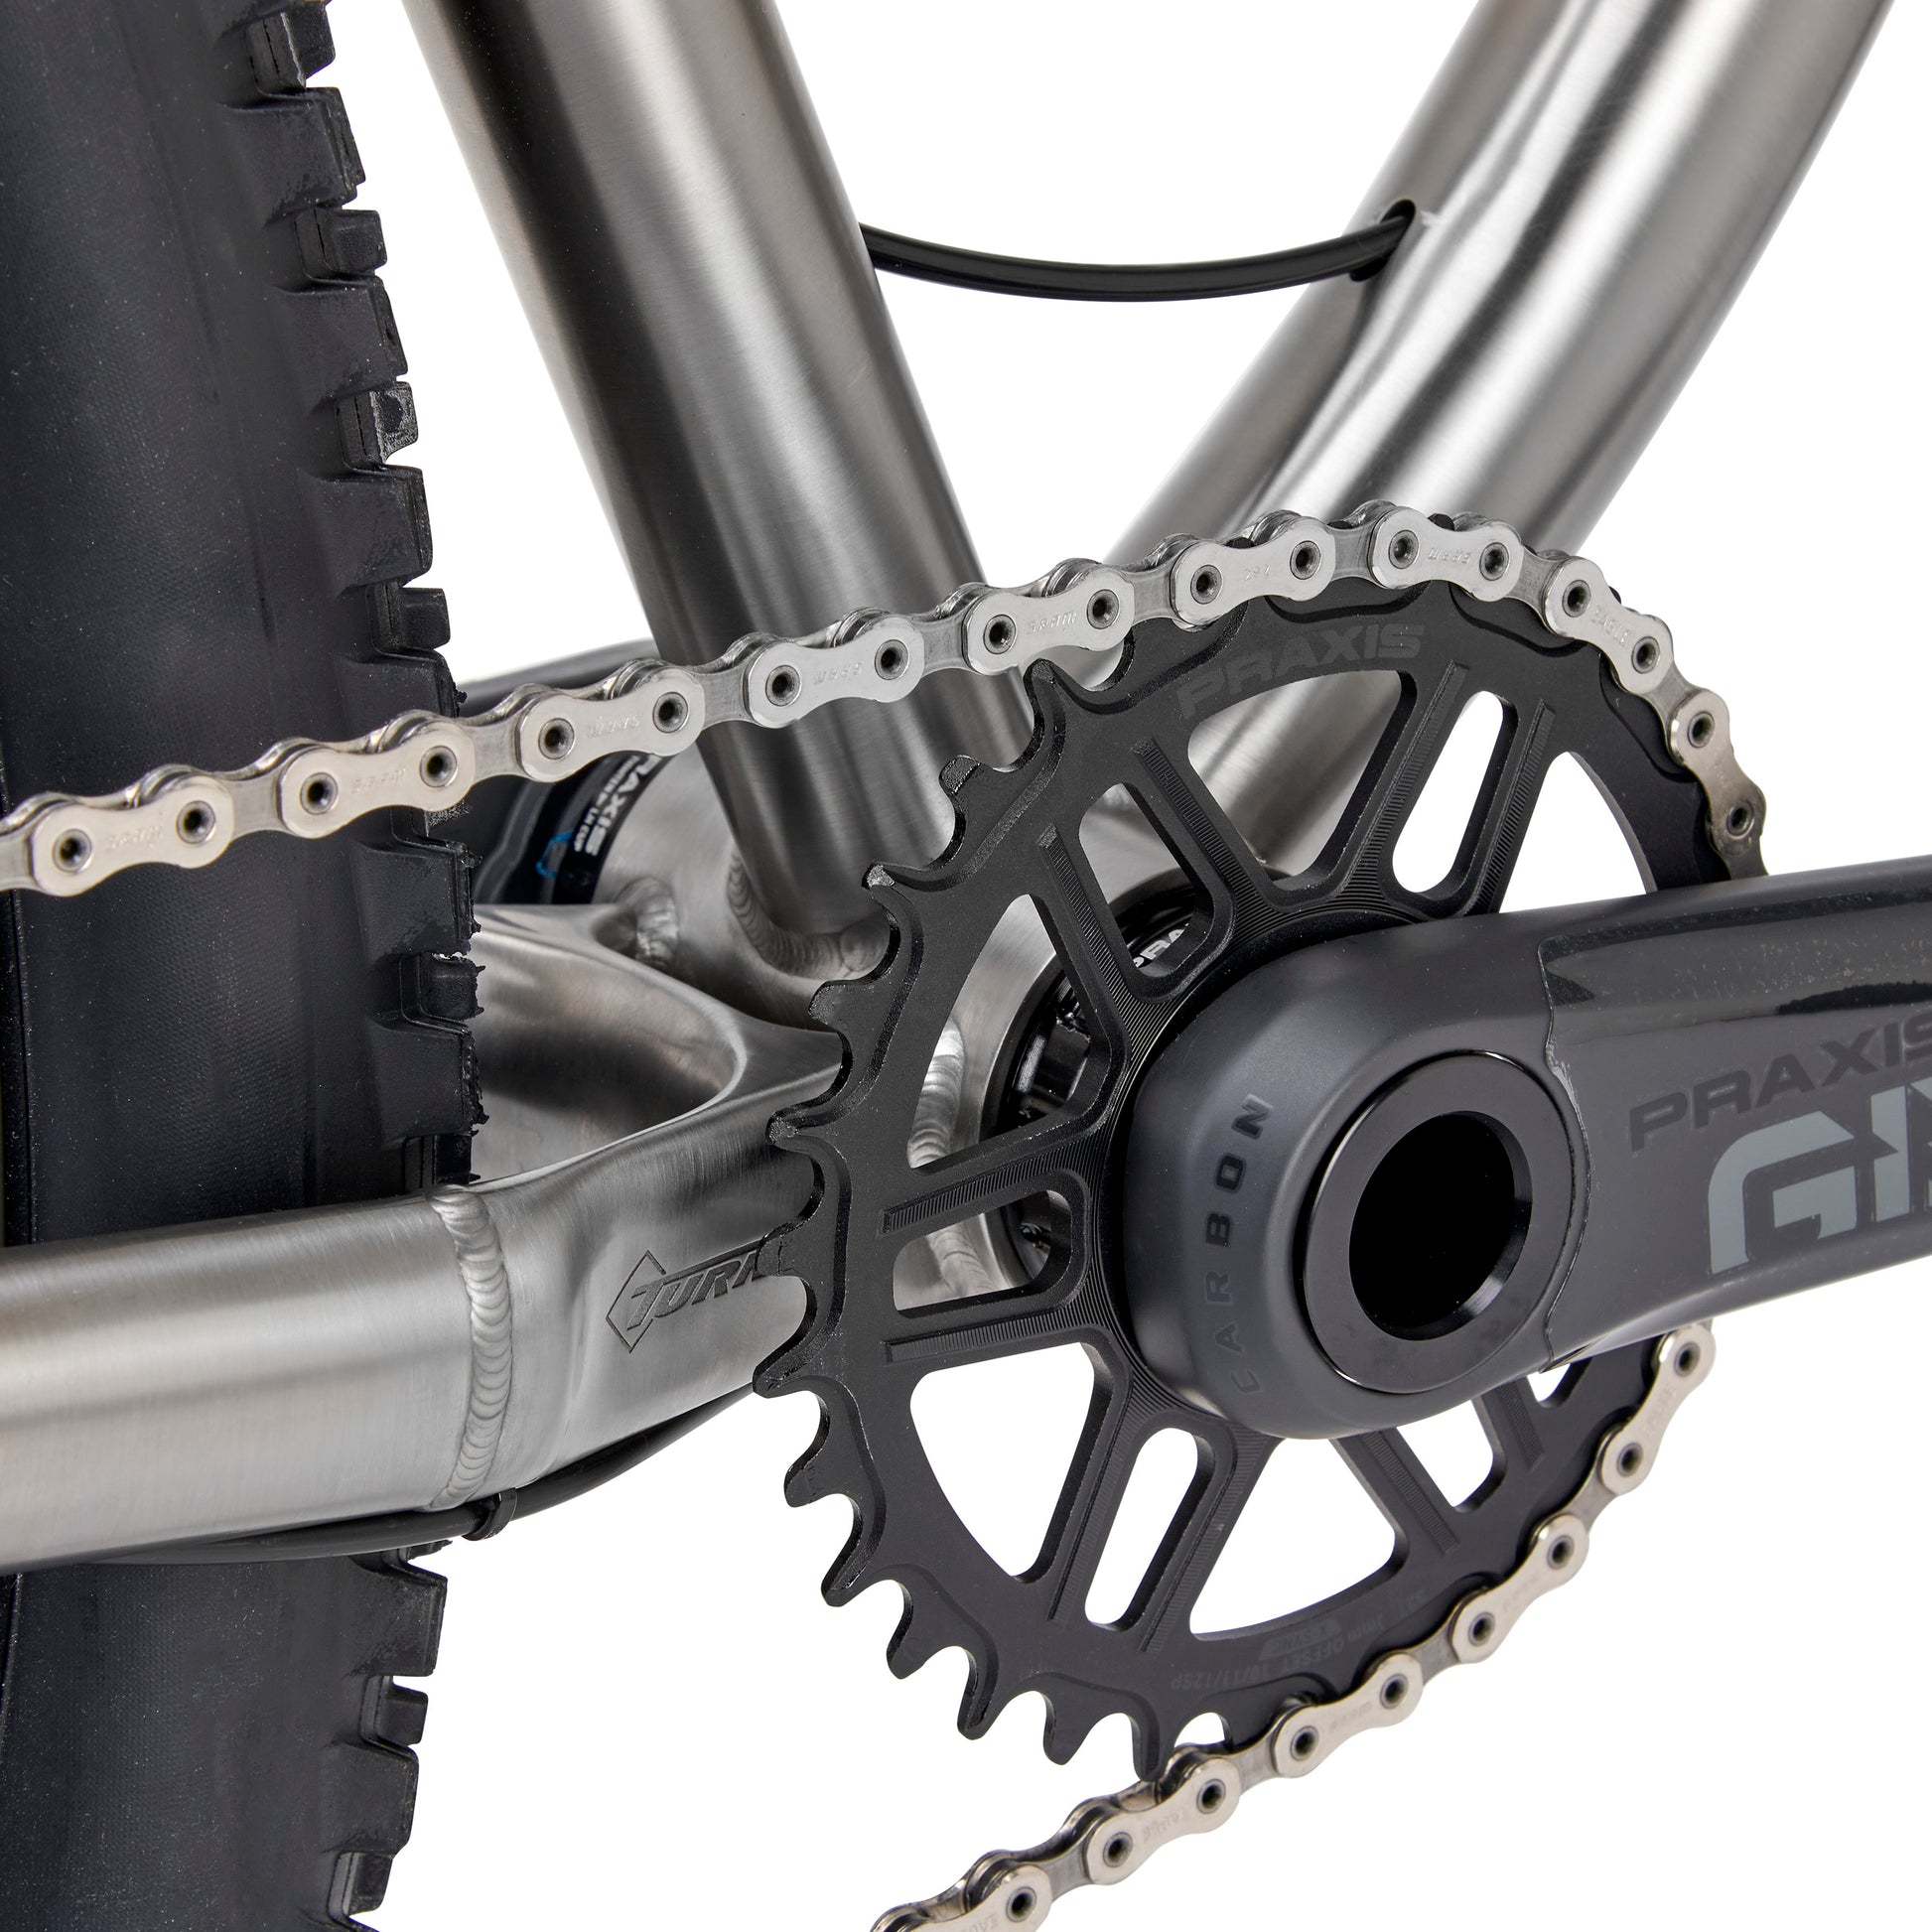 Beautiful 3D printed lower yoke allows for massive tire and chainring clearance. 